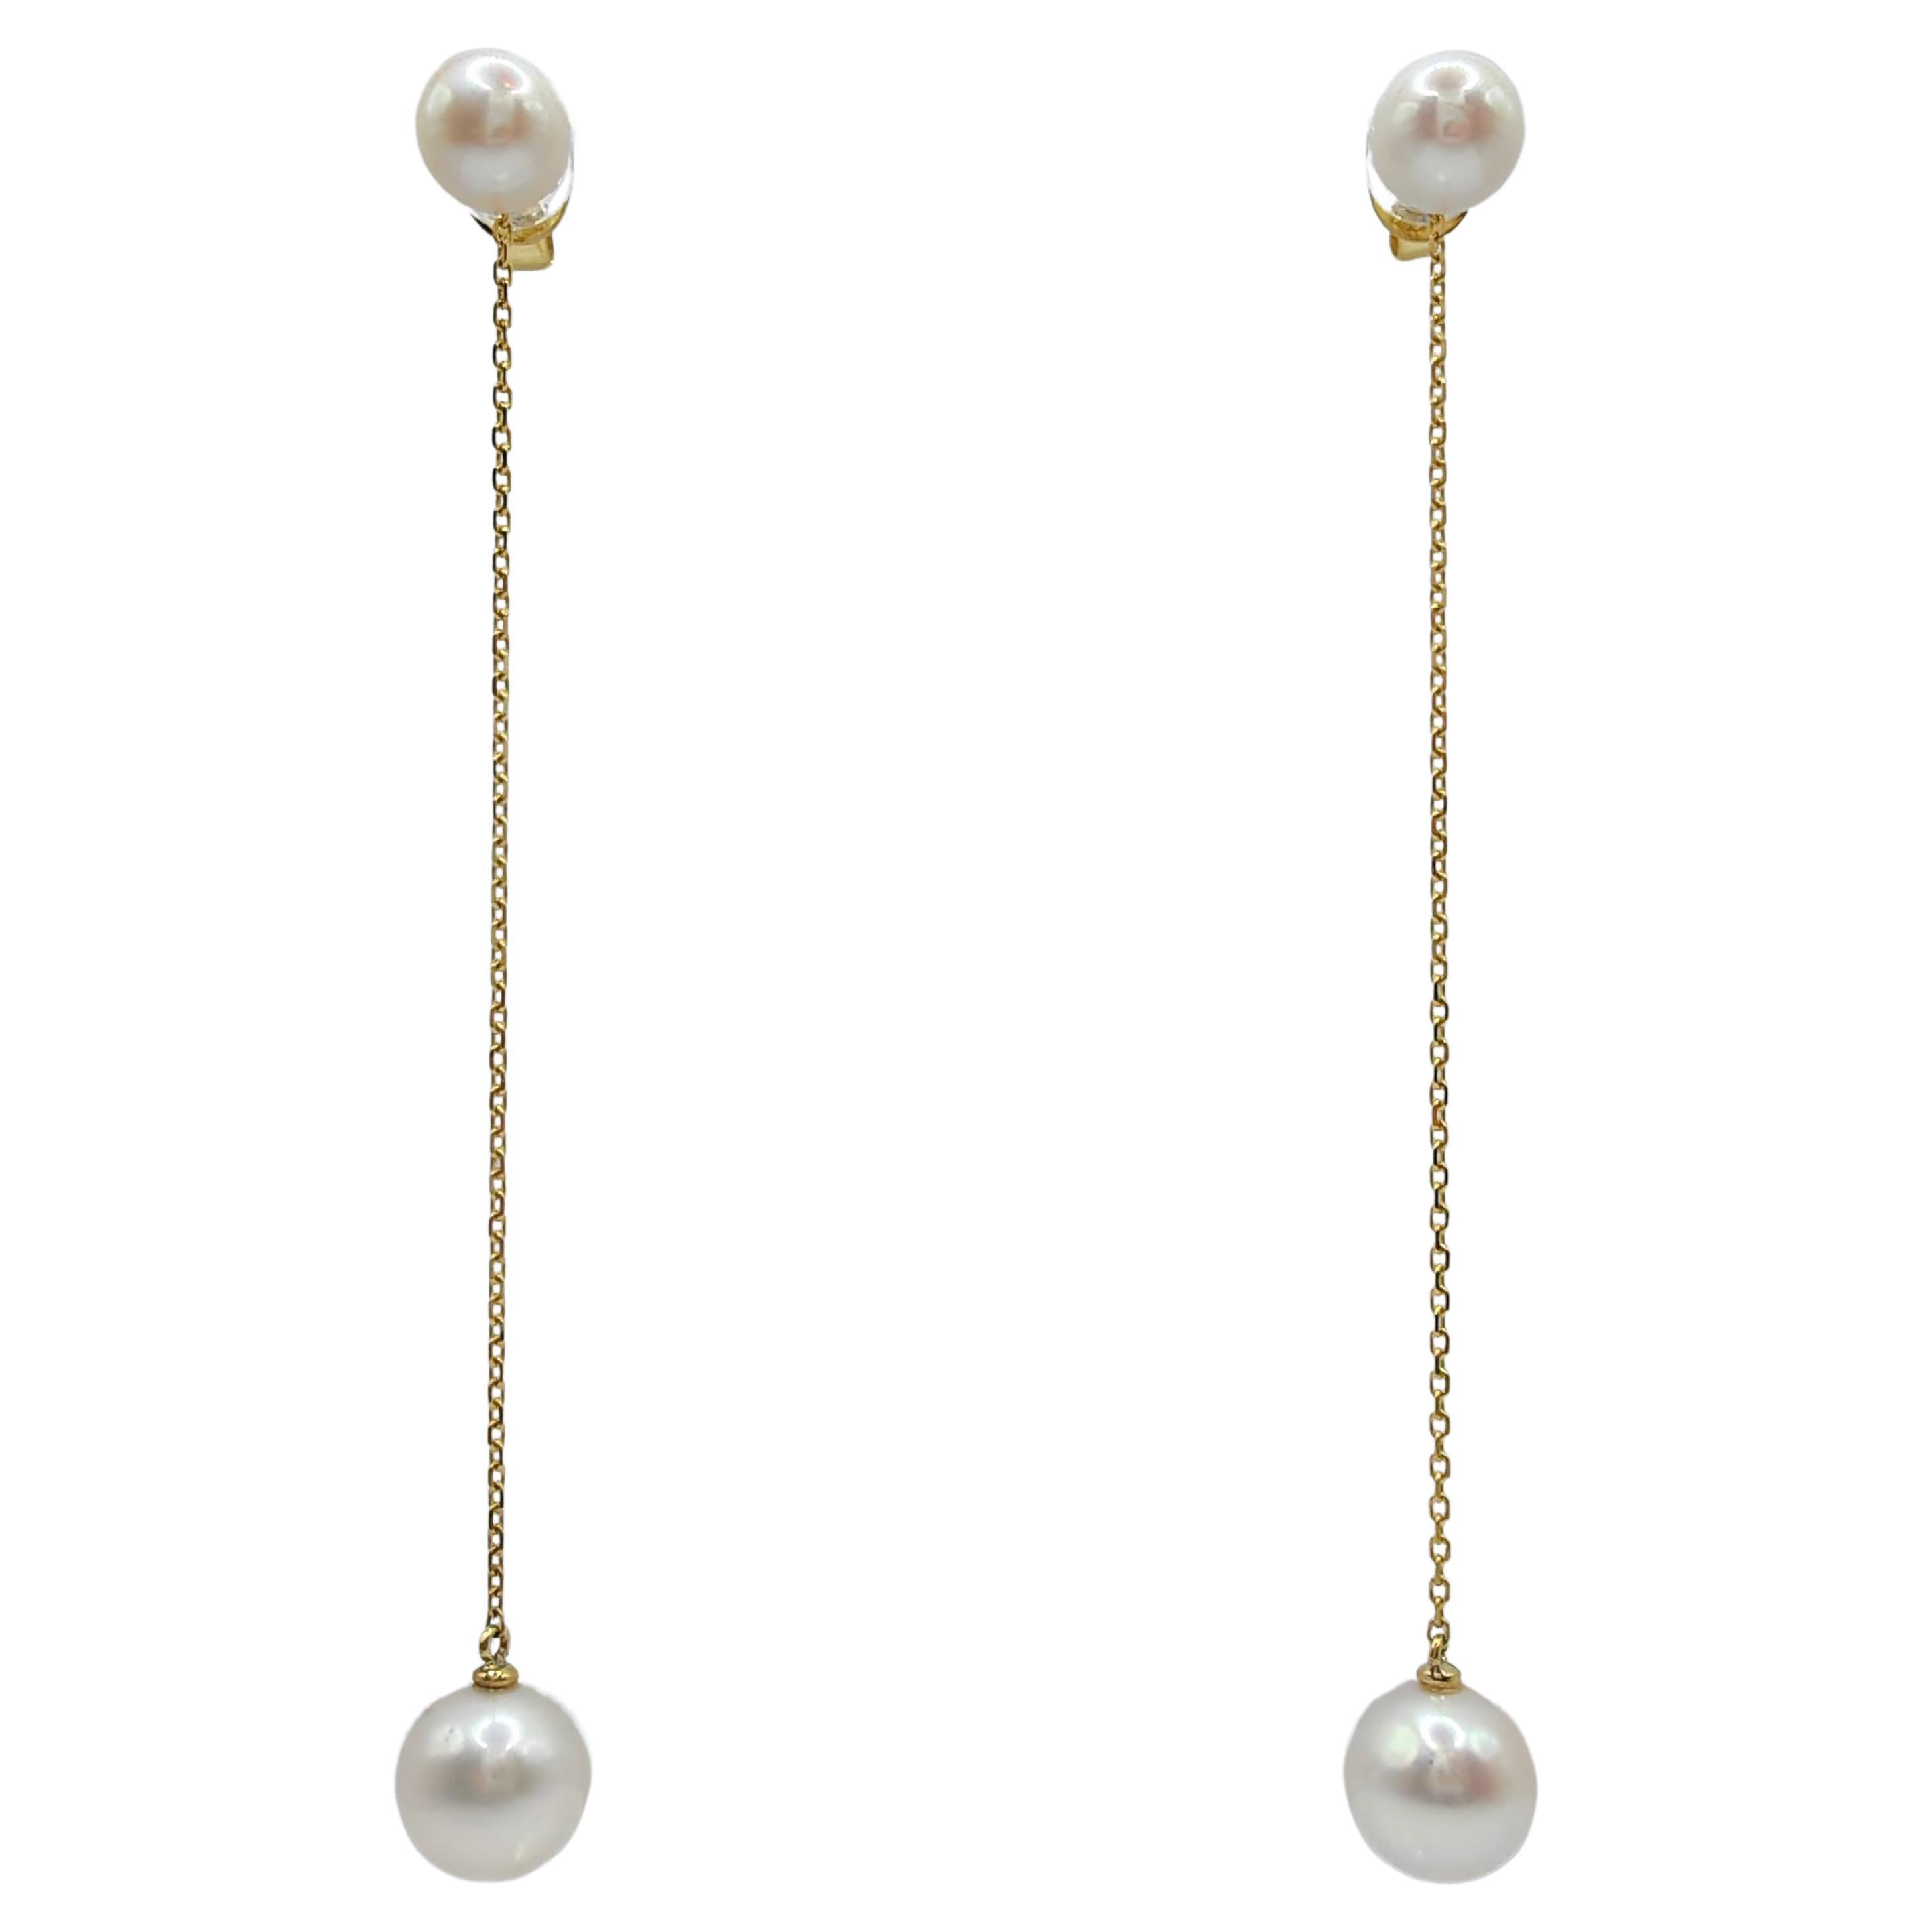 7&9mm Round White Pearl Studs 3.3" Long Dangling Earrings in 18K Yellow Gold